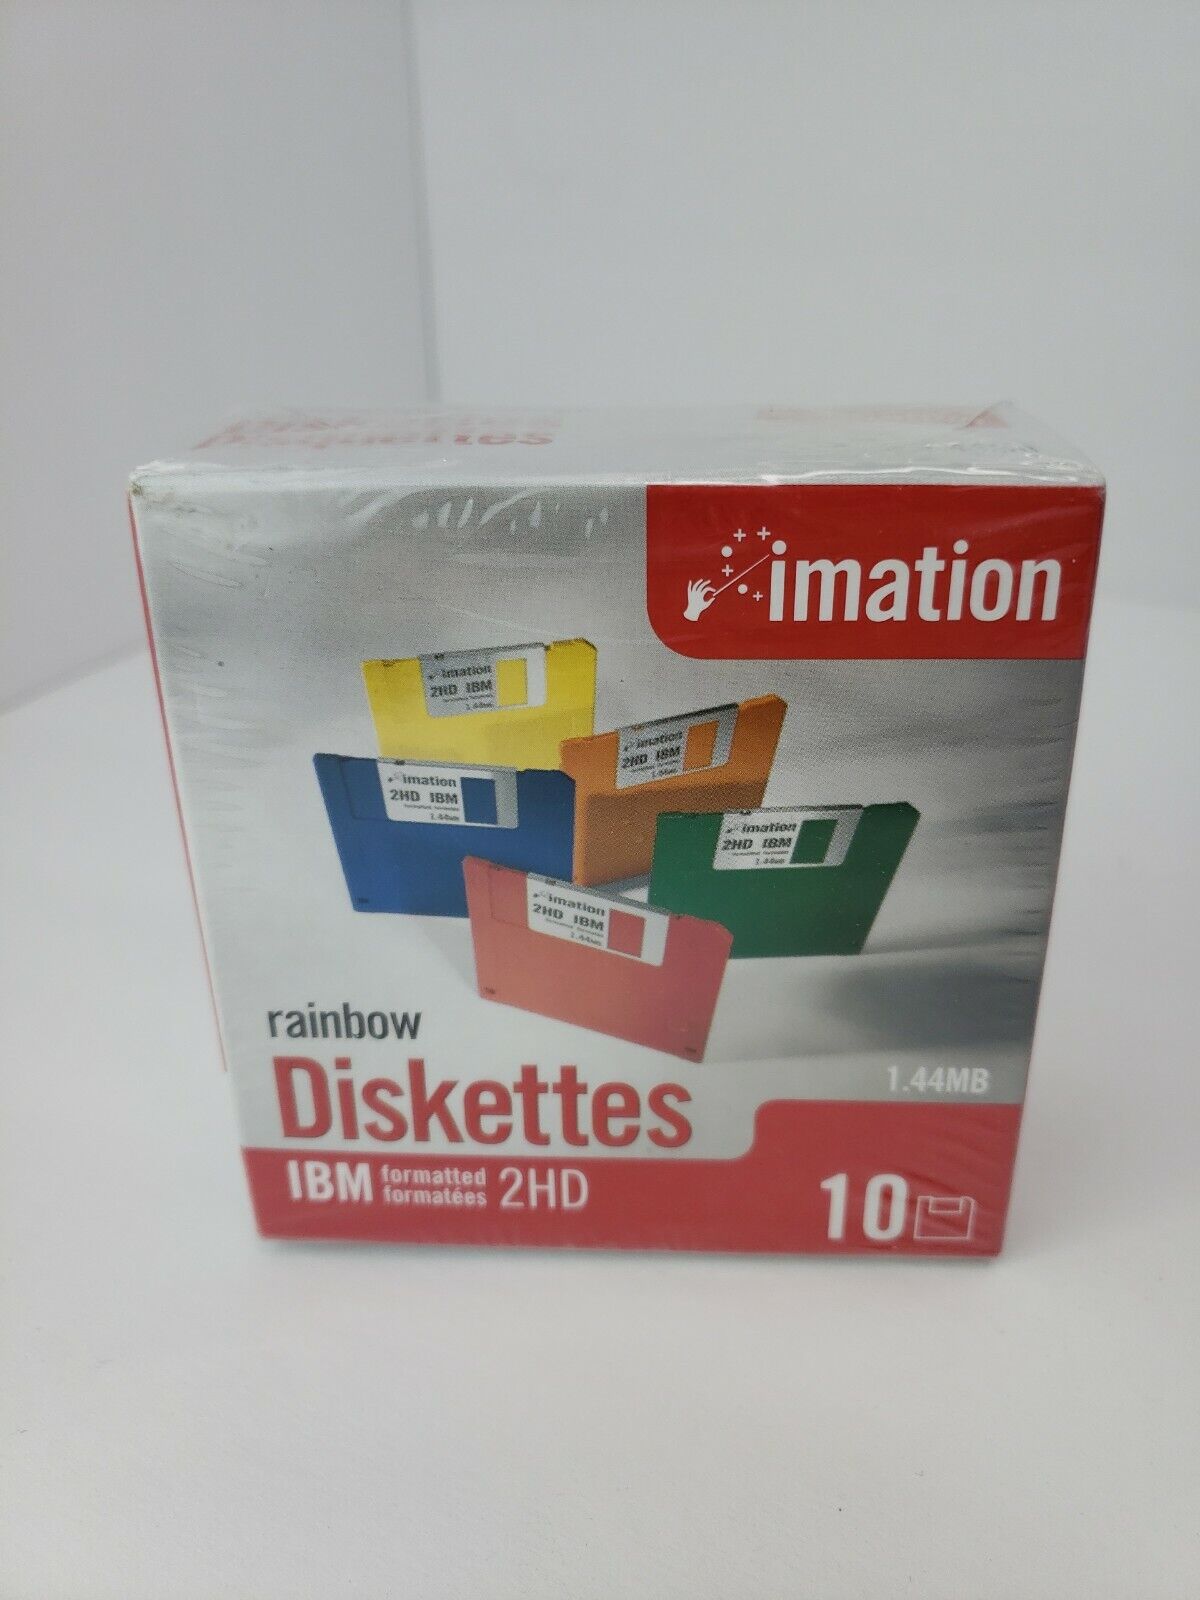 Imation IBM Rainbow Diskettes Vintage Factory Sealed 2HD 10 Count